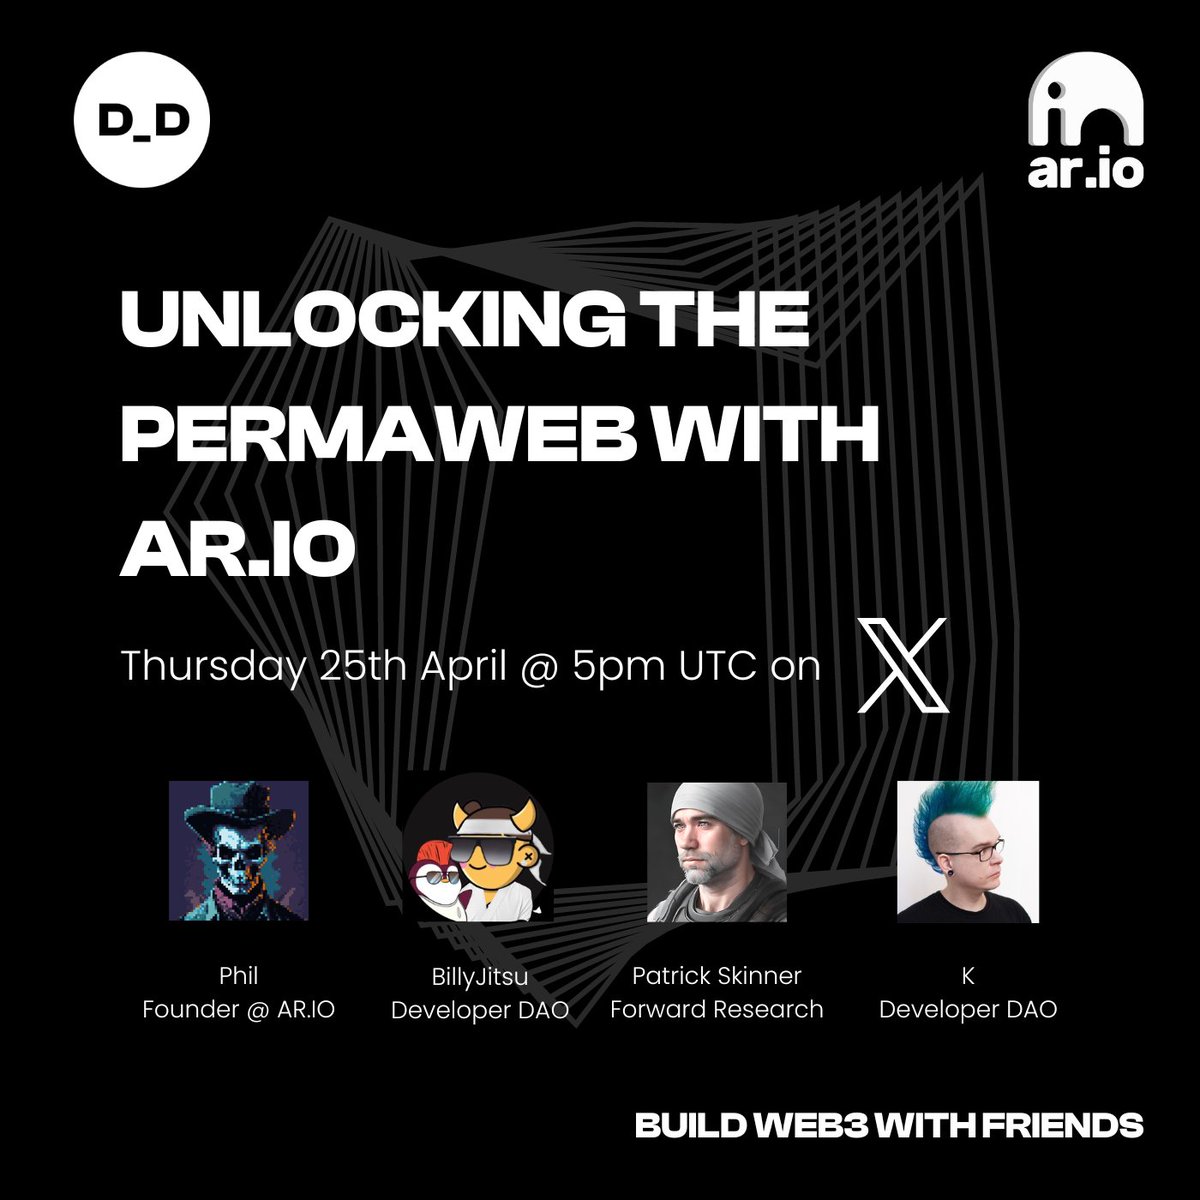 In case you missed it yesterday. Join us on Thur @ 5 pm UTC to chat with @Vilenarios, + now @PSkinnerTech and @K4y1s to discuss: 🐘 Arweave & @ar_io_network gateways 🫂 Our partnership plans 🤑 Education & Incentives for builders See you there 🐘 twitter.com/i/spaces/1Mnxn…